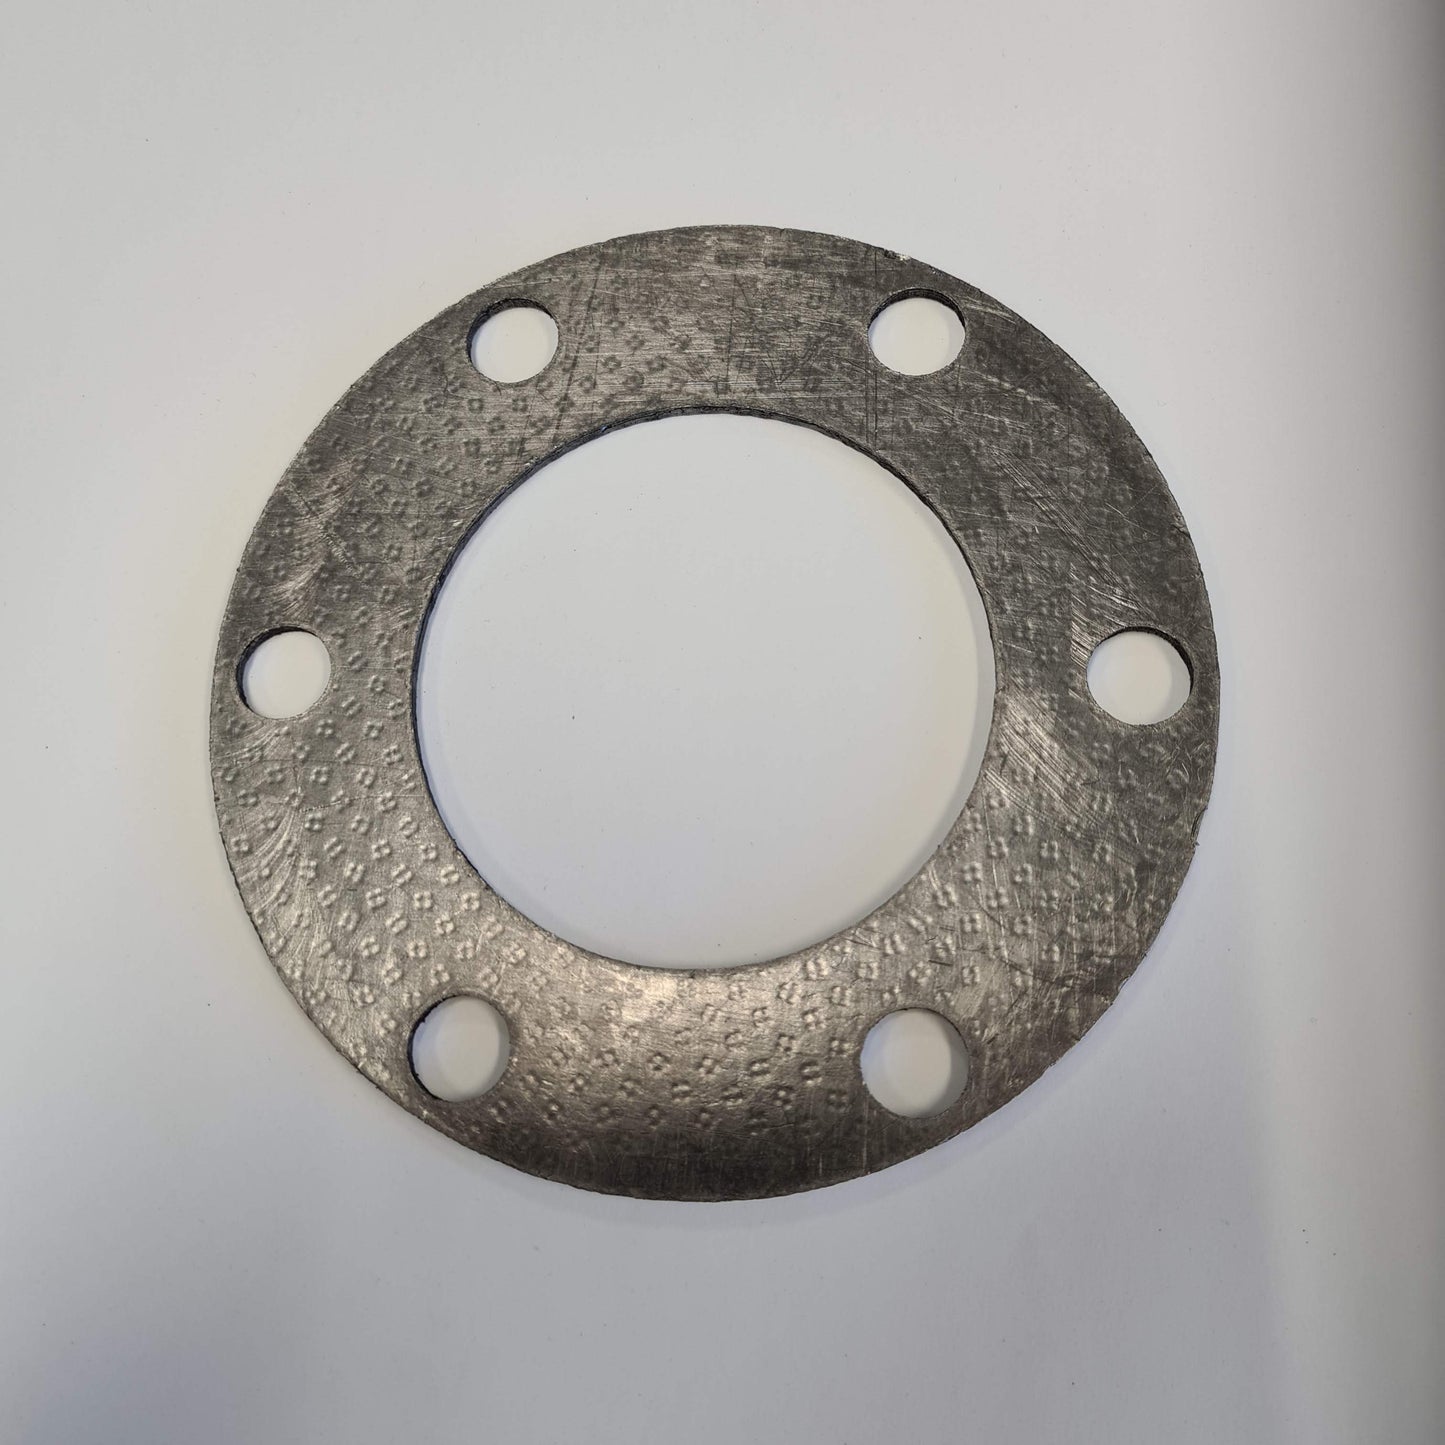 Table E / AS4087 PN16 Flange Gaskets 1/2" to 12" 15NB to 300NB